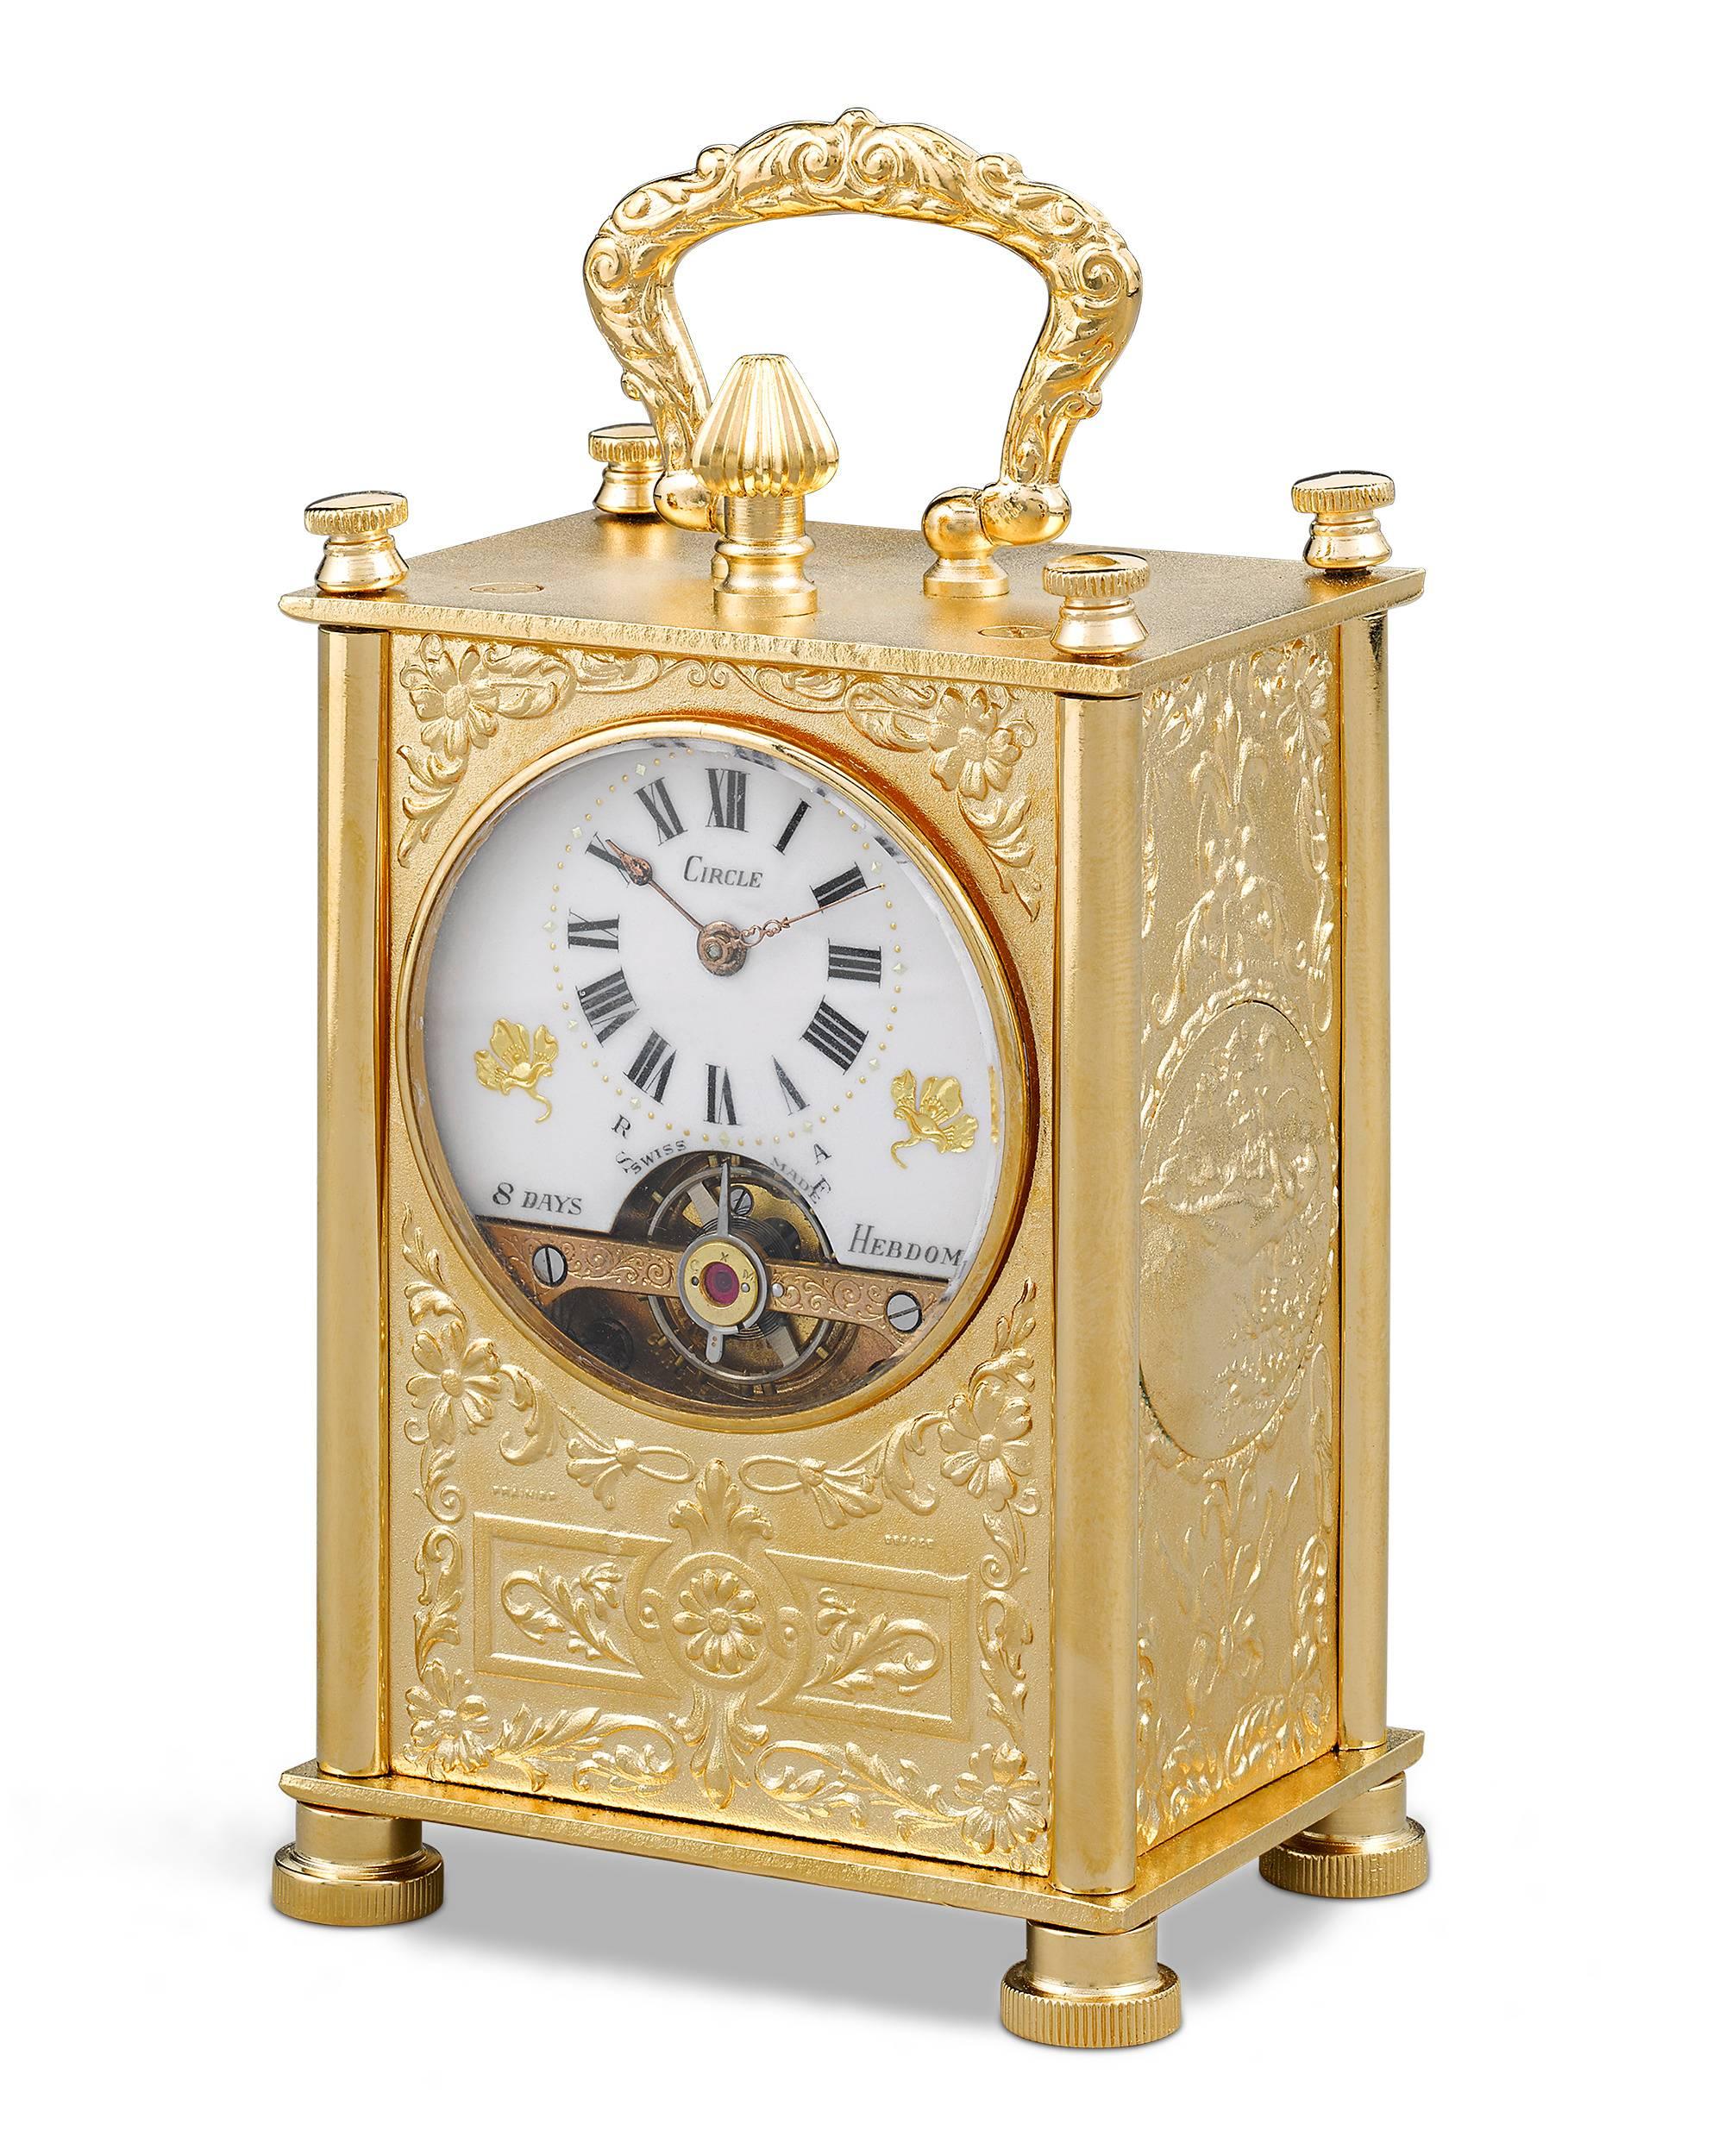 This charming 8-day Swiss carriage clock is crafted of gilt bronze in an elegant Neoclassical style. These incredibly complex clock mechanisms were well suited for travel, for they operate without a pendulum. During the second half of the 19th